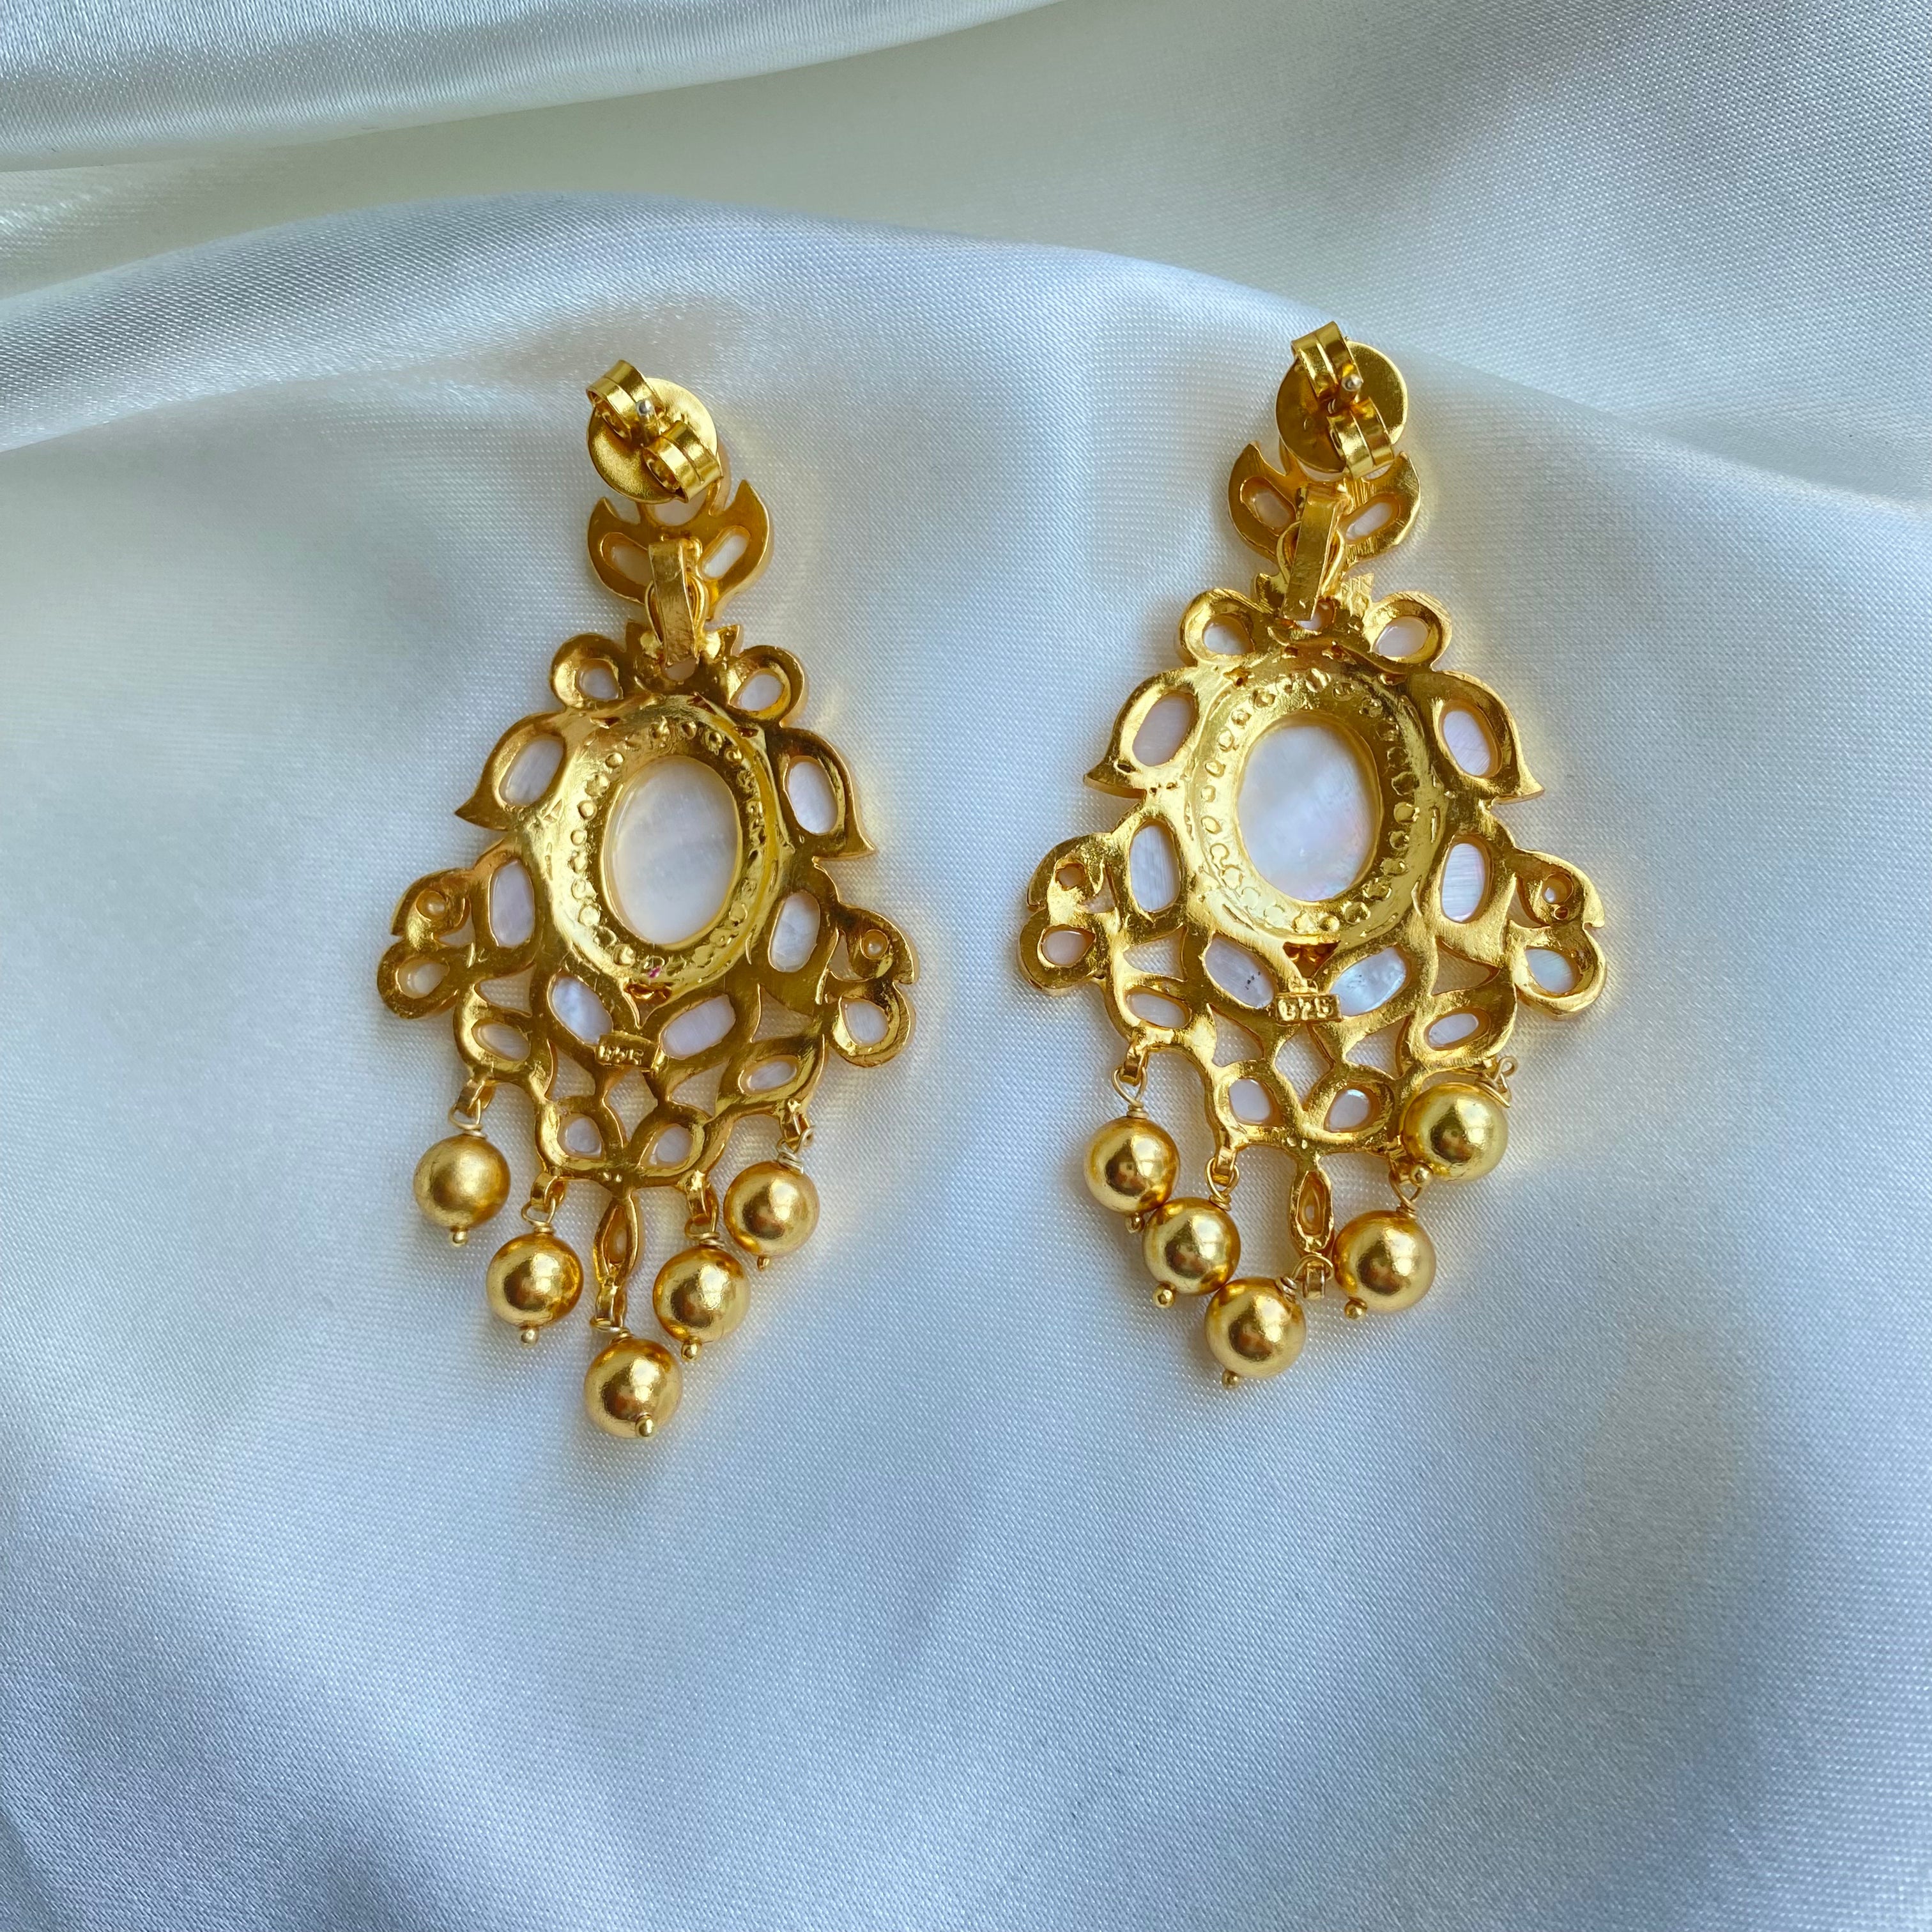 Maya Blossom Earrings - Mother of Pearl with Gold drops